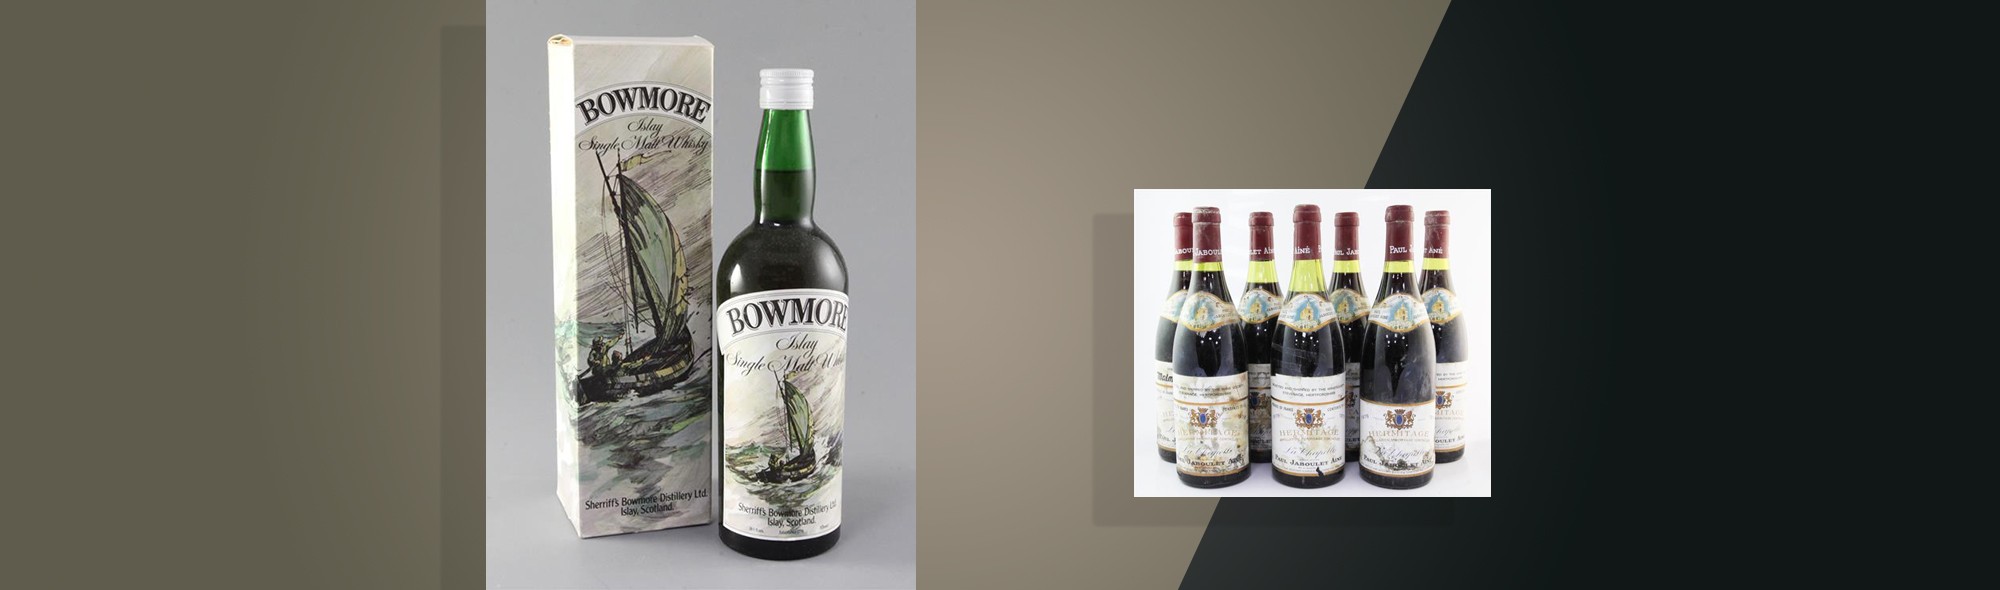 bowmore whisky and bottles of red wine